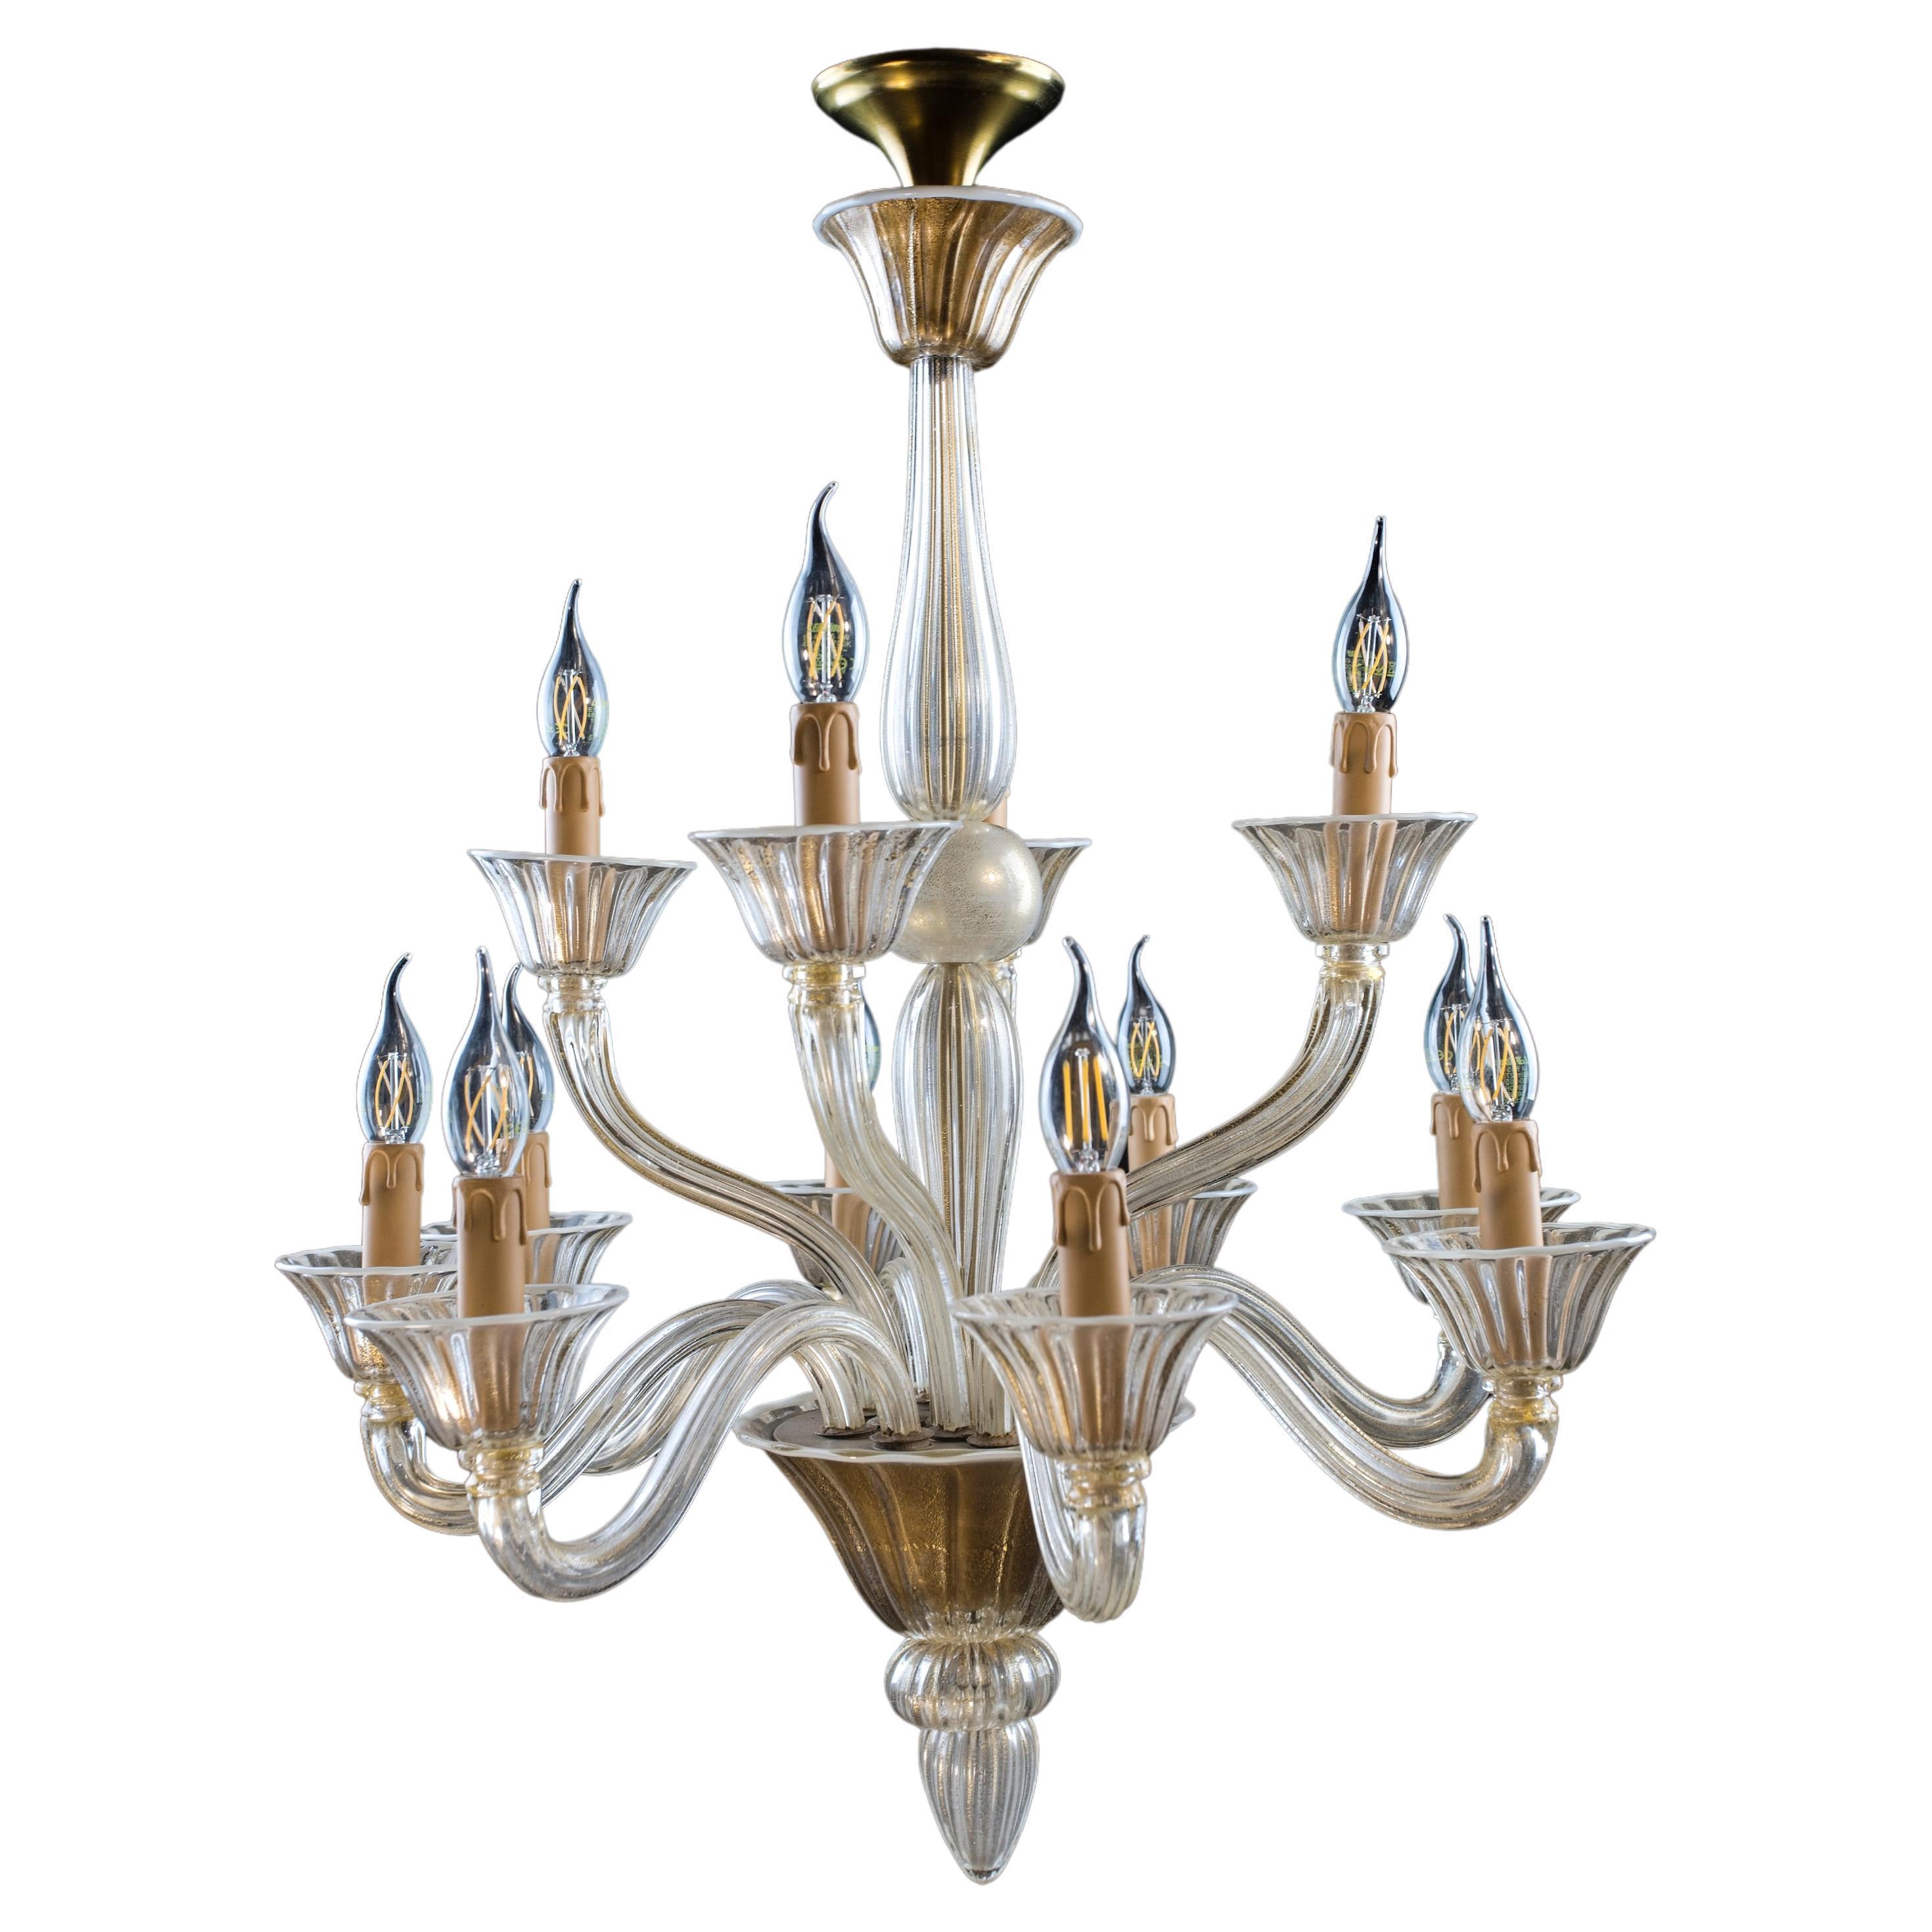 Venetian glass chandelier 12 arms For Sale